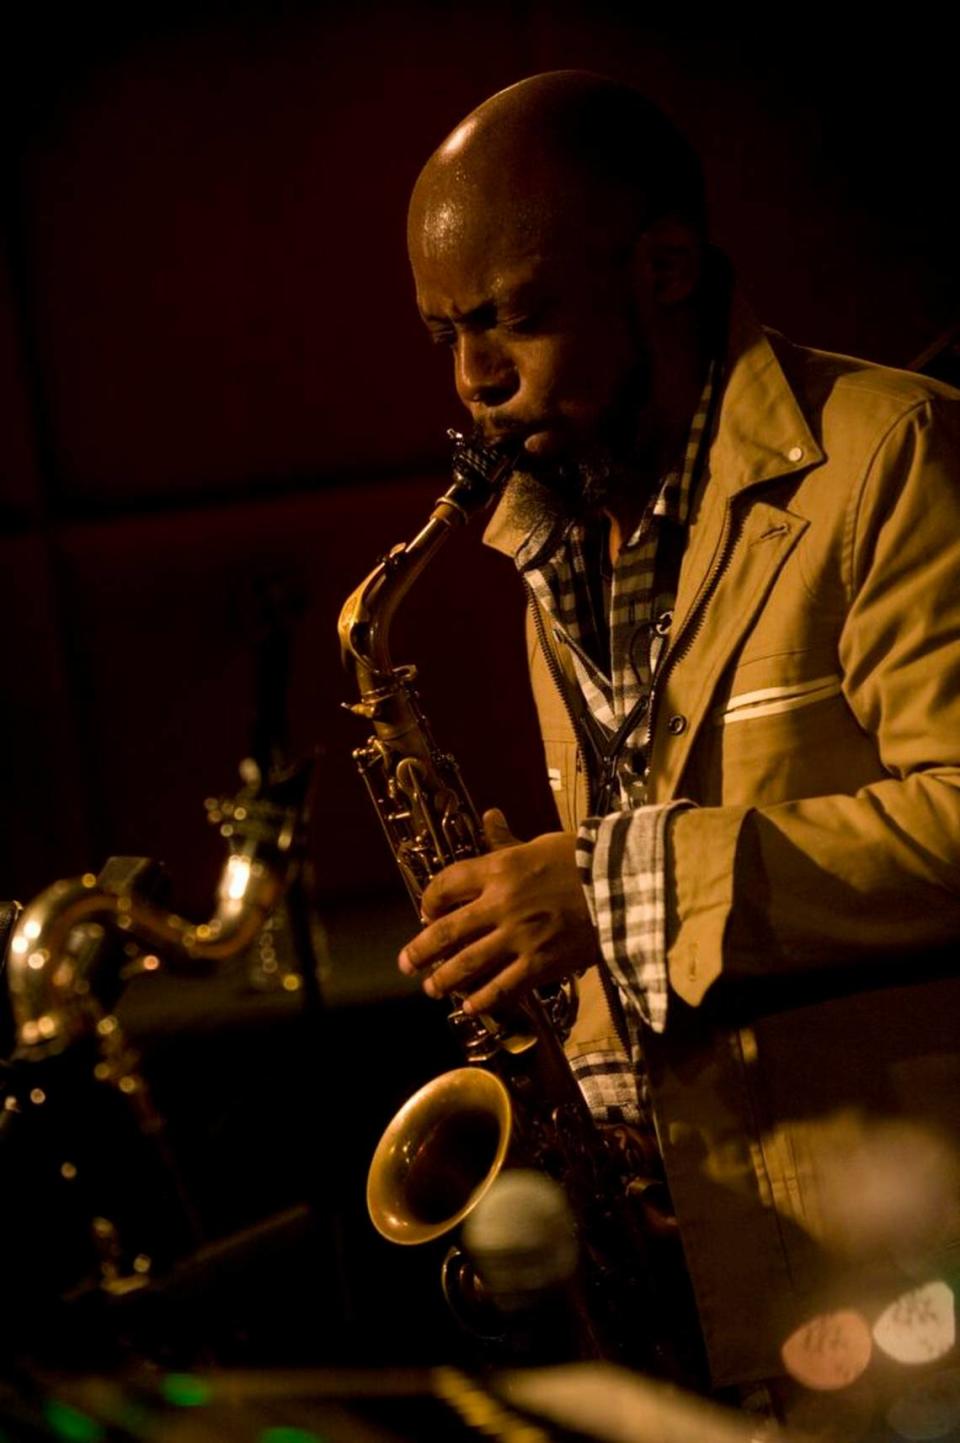 Saxophonist and University of Miami faculty member Marcus Strickland plays Sunday at the GroundUP Festival with his band Twi-Life, and also offers a masterclass on music as medicine. (Photo by Petra Richterova and courtesy of GroundUP Music Festival)